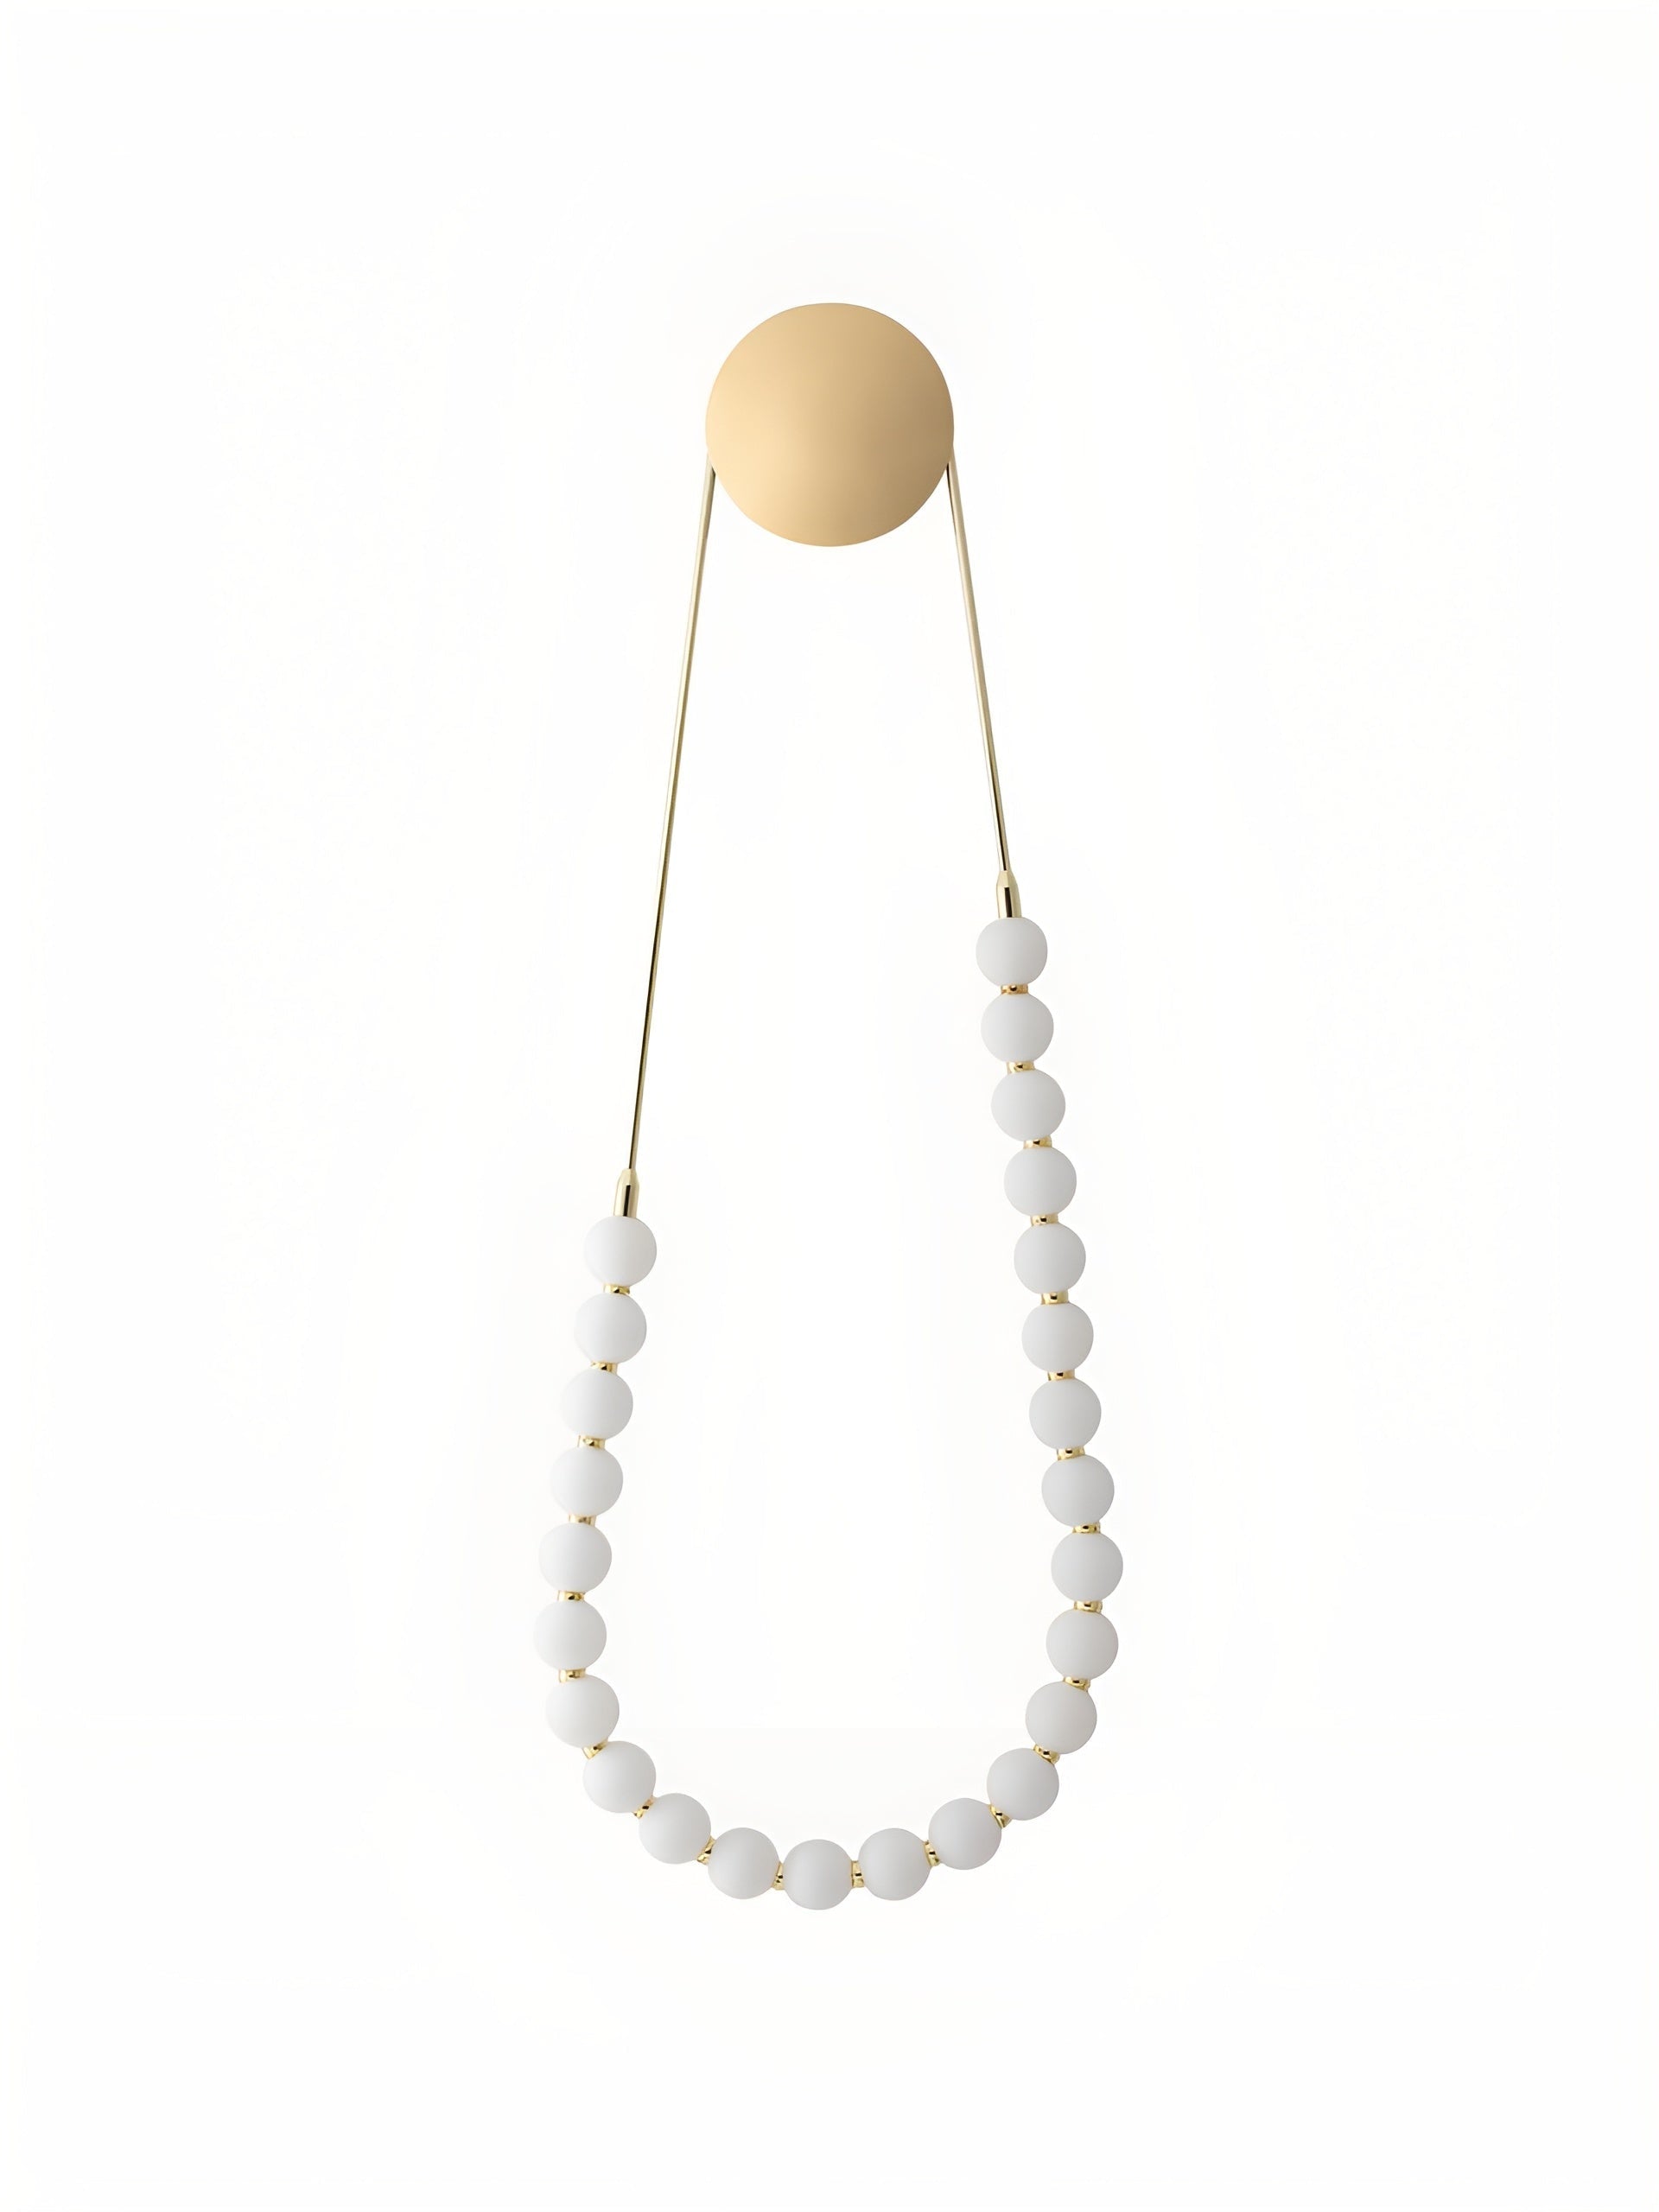 Necklace Wall Lamp | Modern Chain Lighting Parisian Chic Light Fixture For Homes Restaurants - Sconces